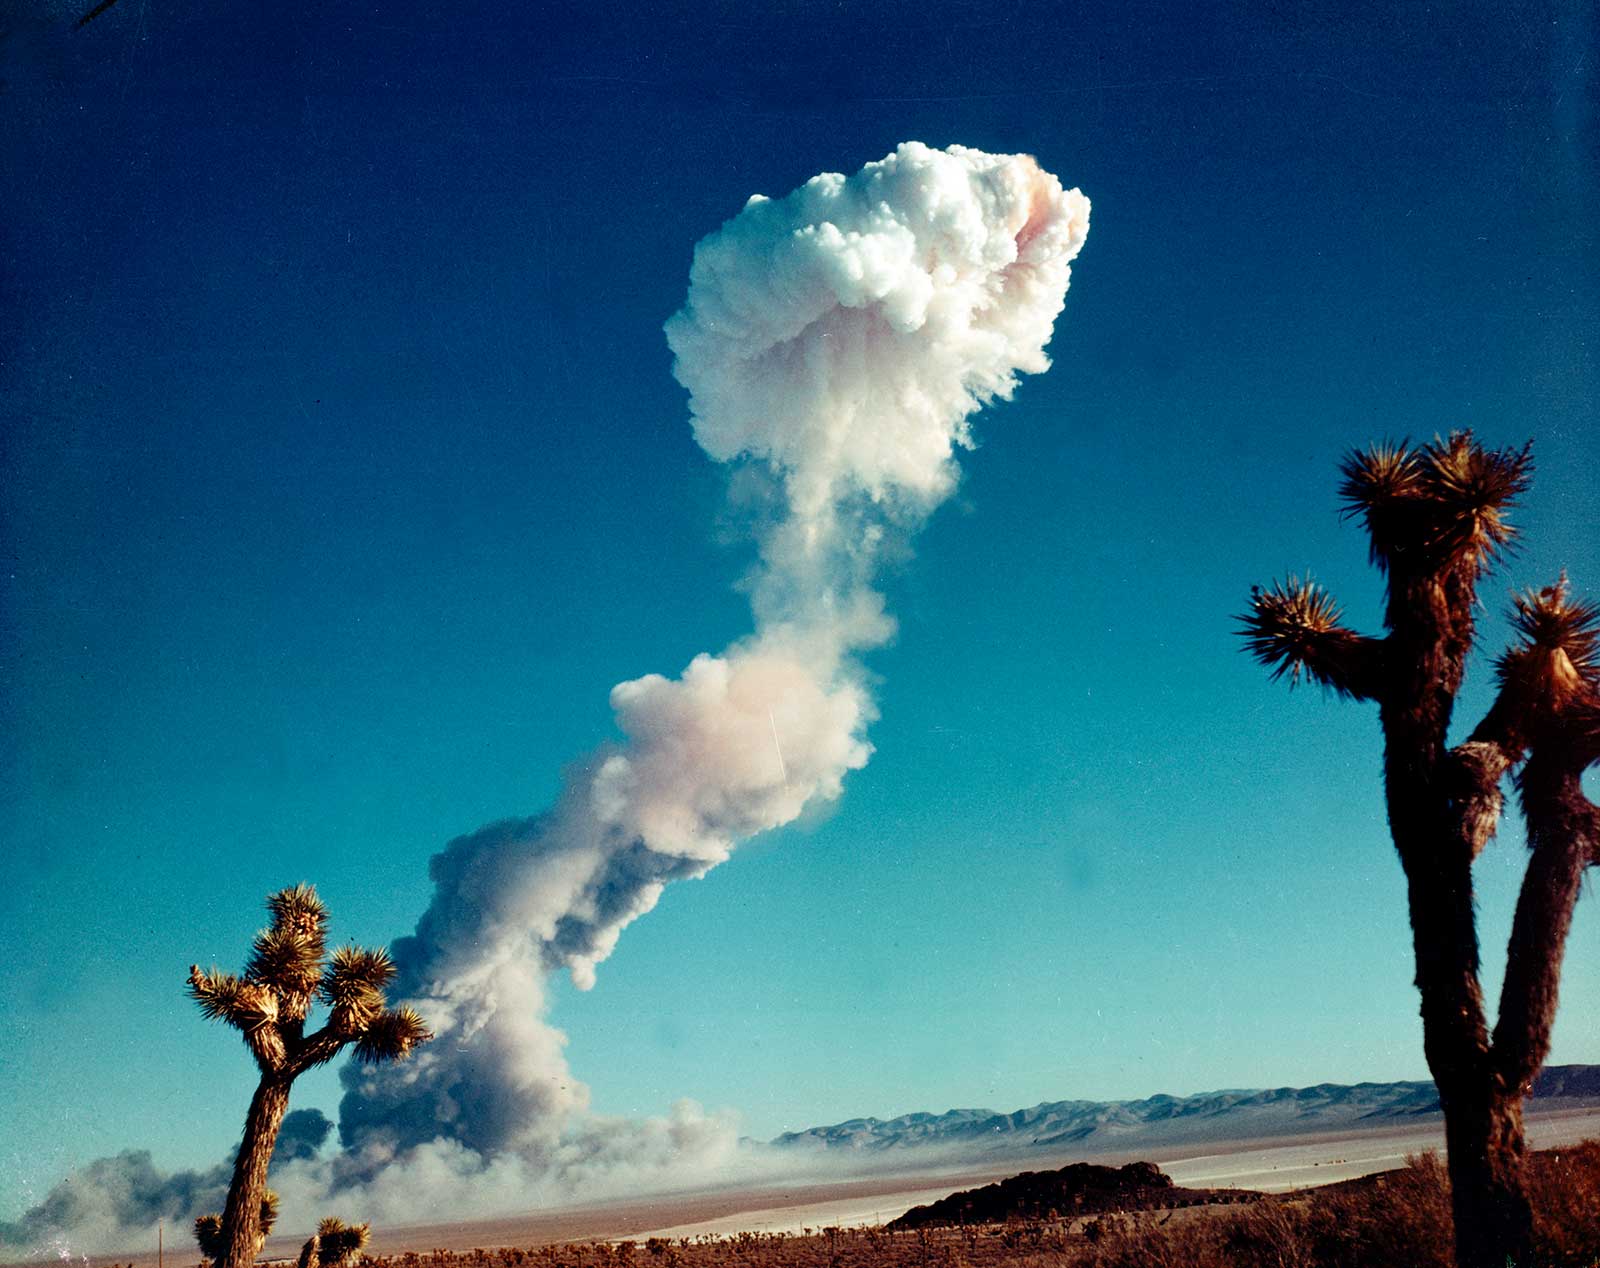 The mushroom cloud forming at the Nevada Test Site.